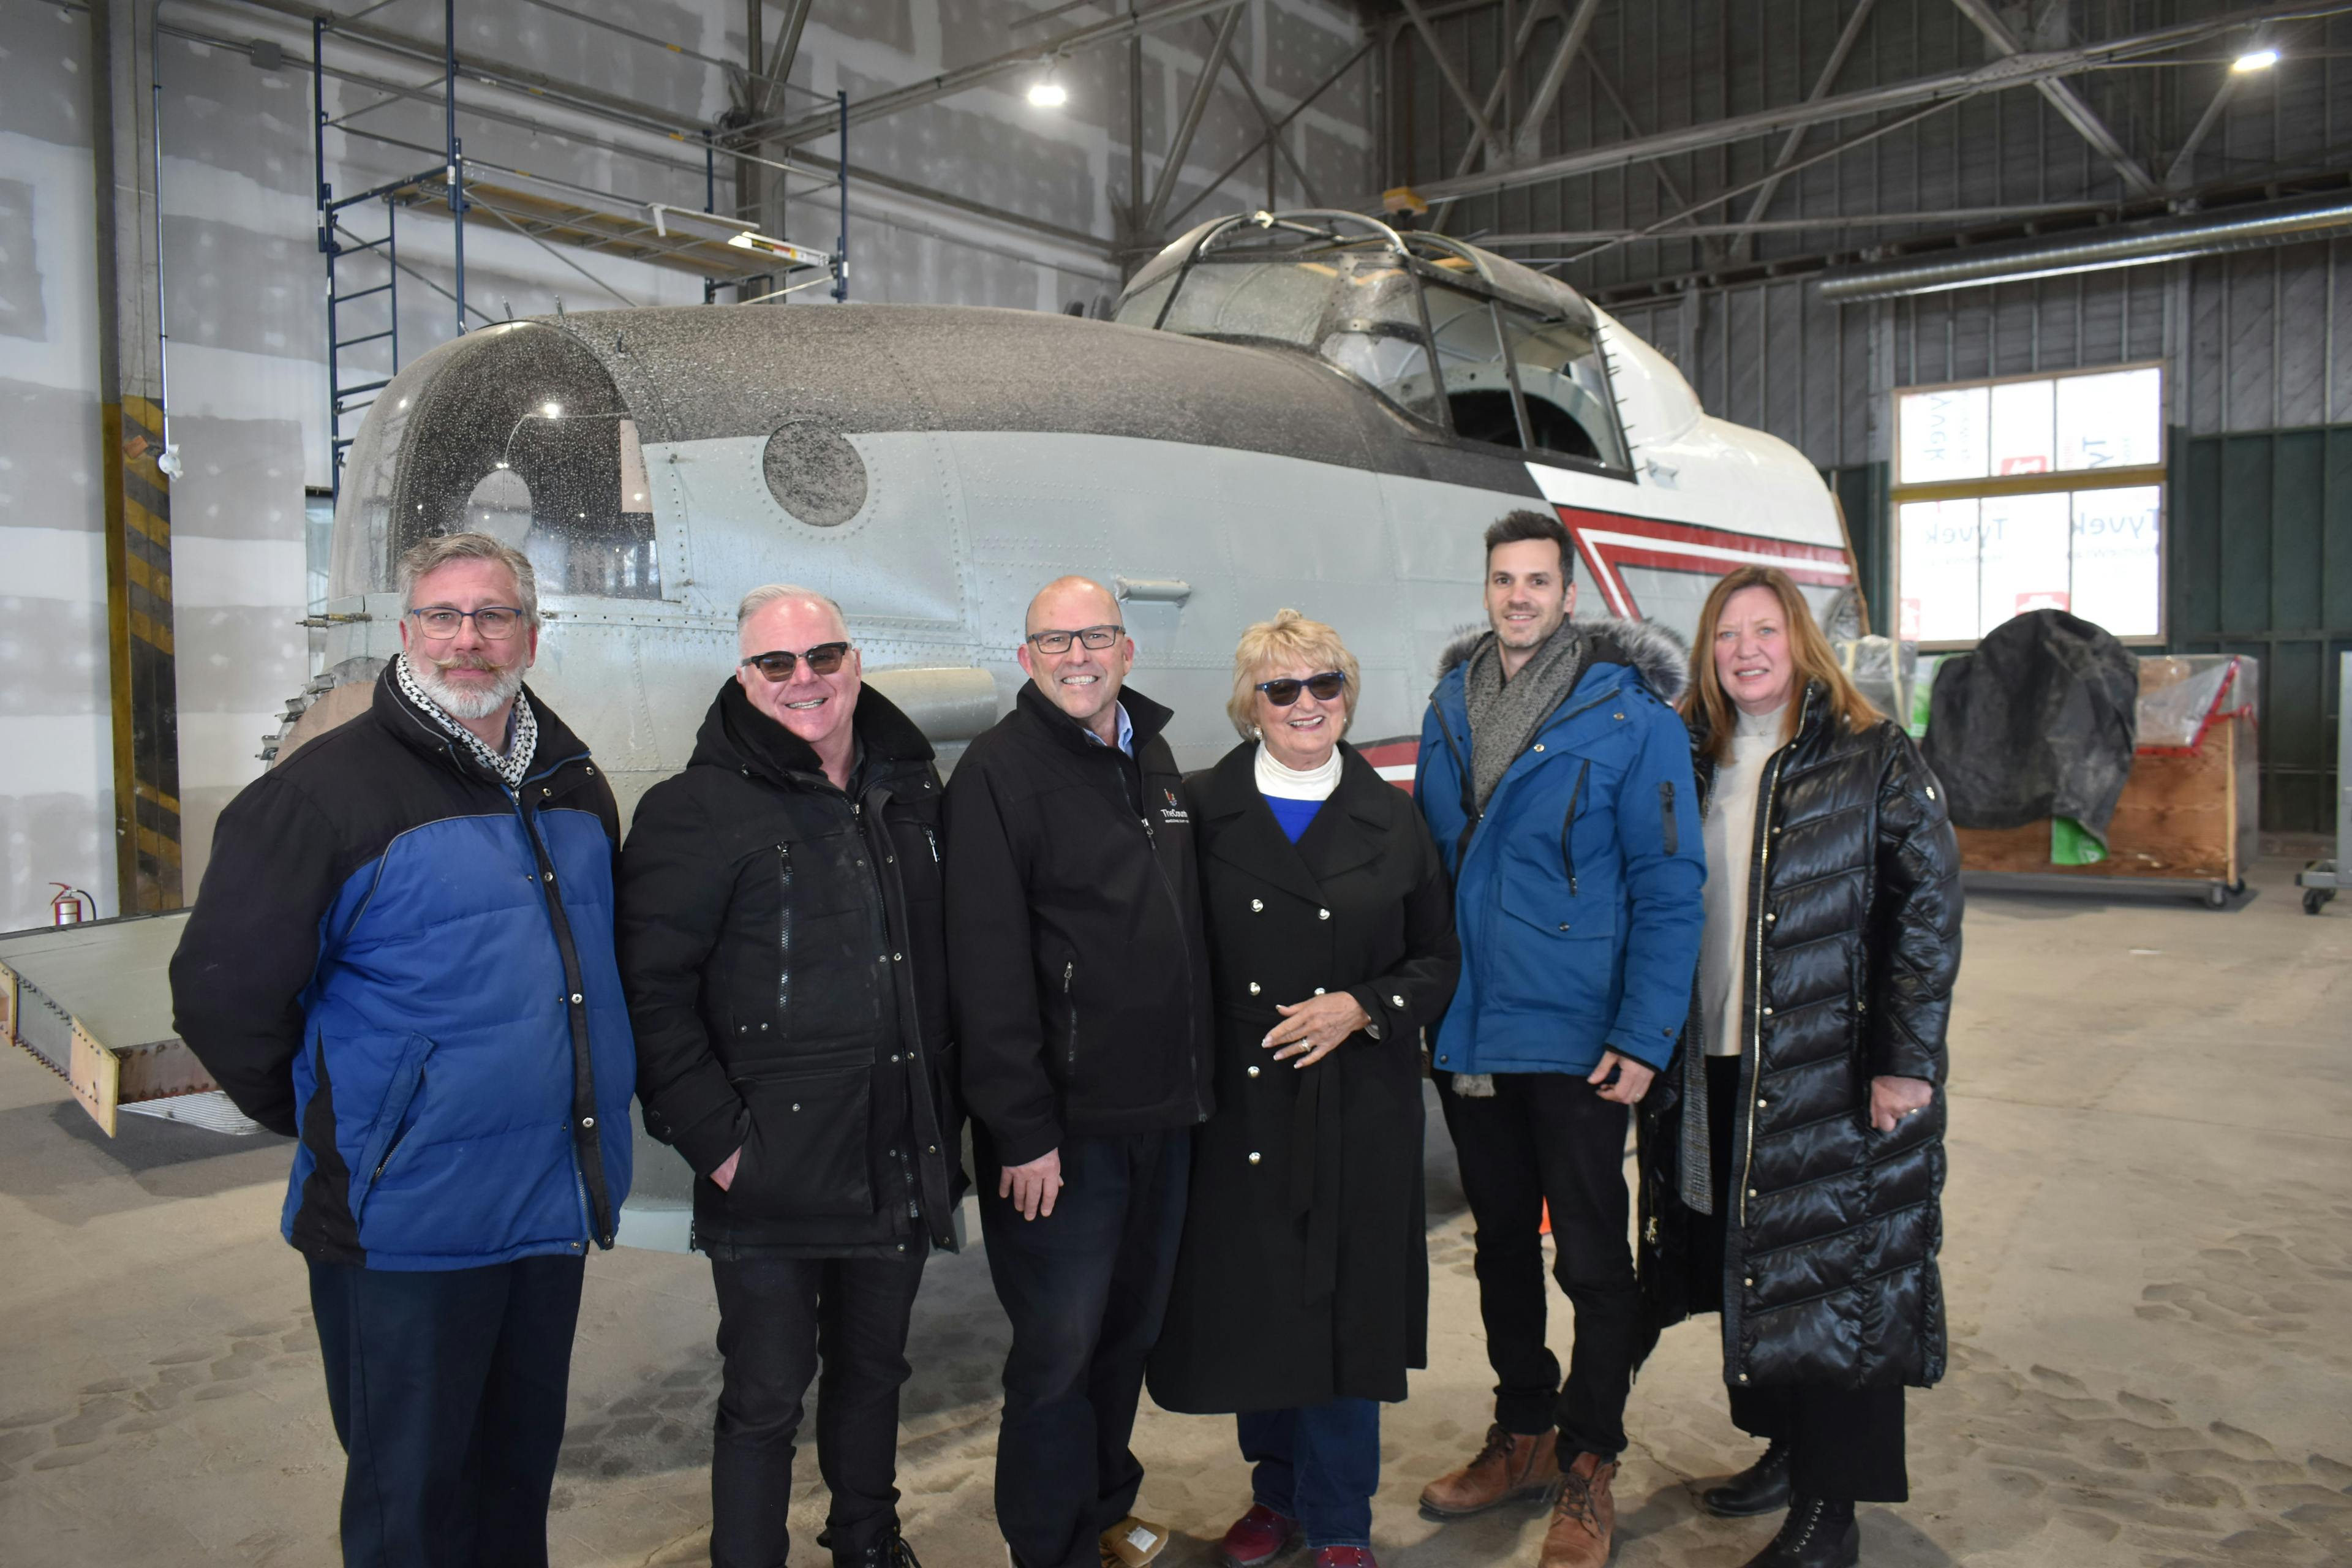 <p>From left Kevin Windsor (Executive Director, National Air Force Museum of Canada); Tim Jones (CEO, Base31); Steve Ferguson (Mayor, Prince Edward County); Susan Scarborough (Board Chair, National Air Force Museum of Canada); Assaf Weisz (Chief Placemaking Officer, Base31) and Jacqui Burley (Museum Consultant, Base31) (Jason Parks/Gazette Staff)</p>
